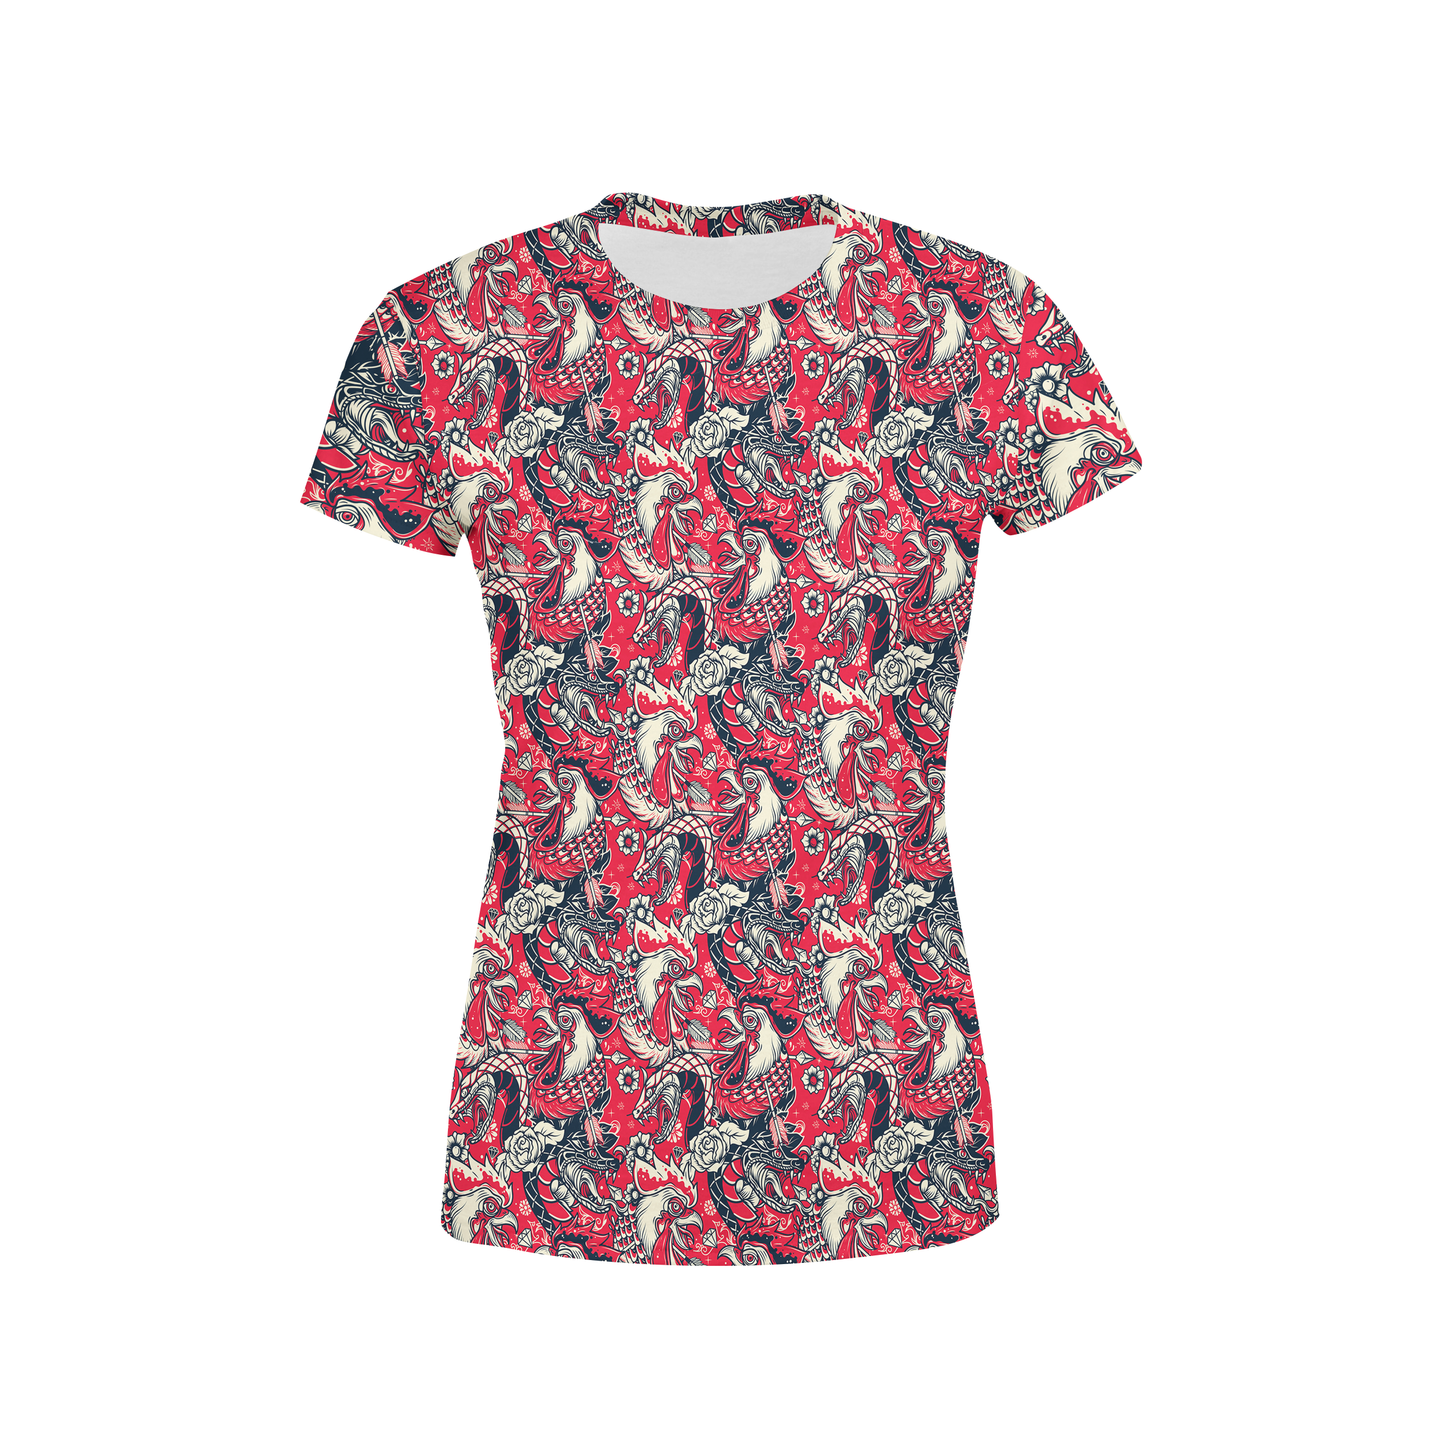 Women's Snakes and Chickens T-Shirt